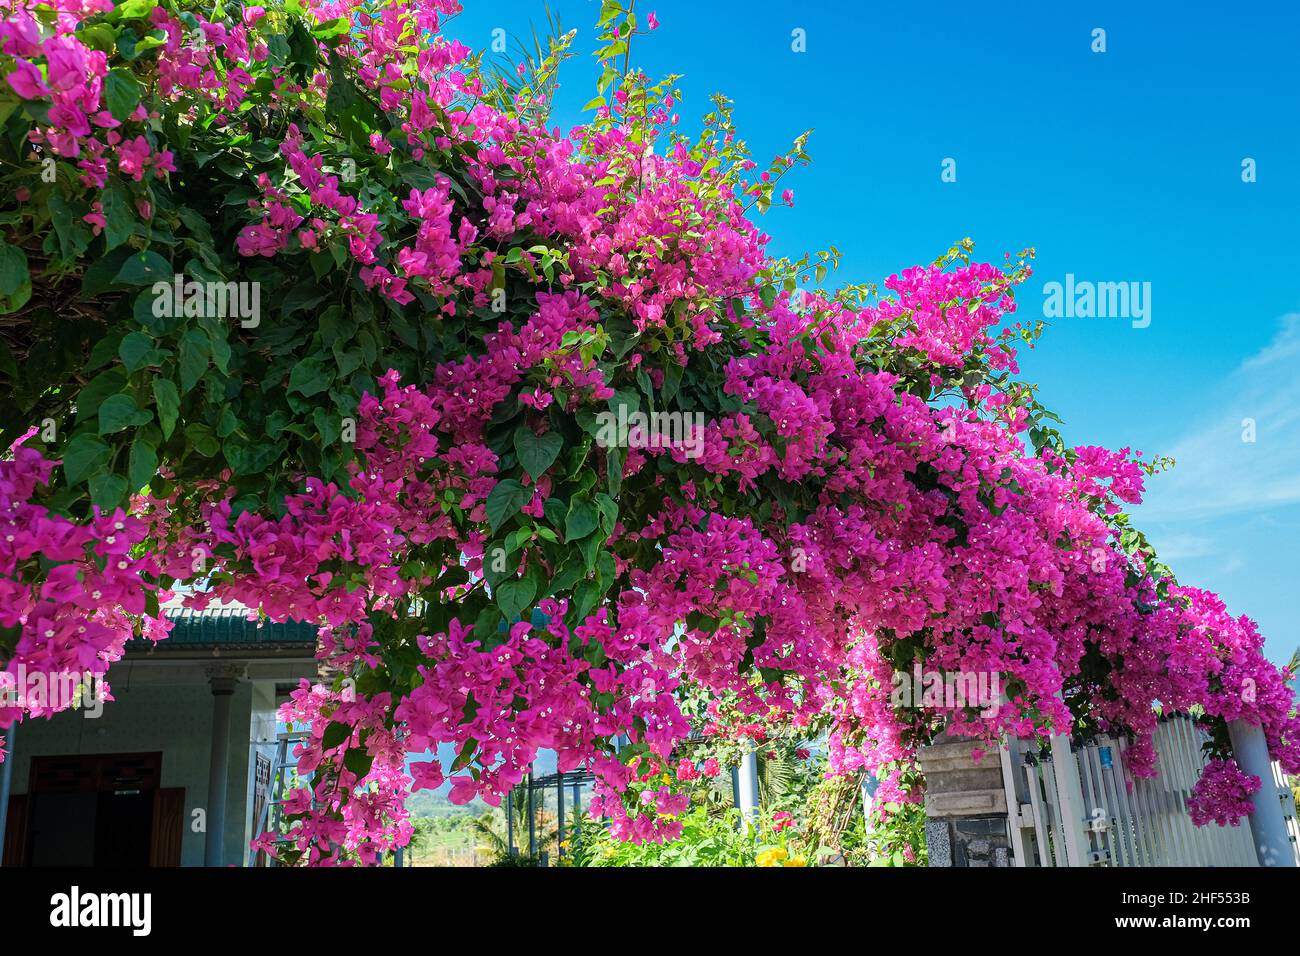 confetti, woody plant, shrub or tree with thorns Stock Photo